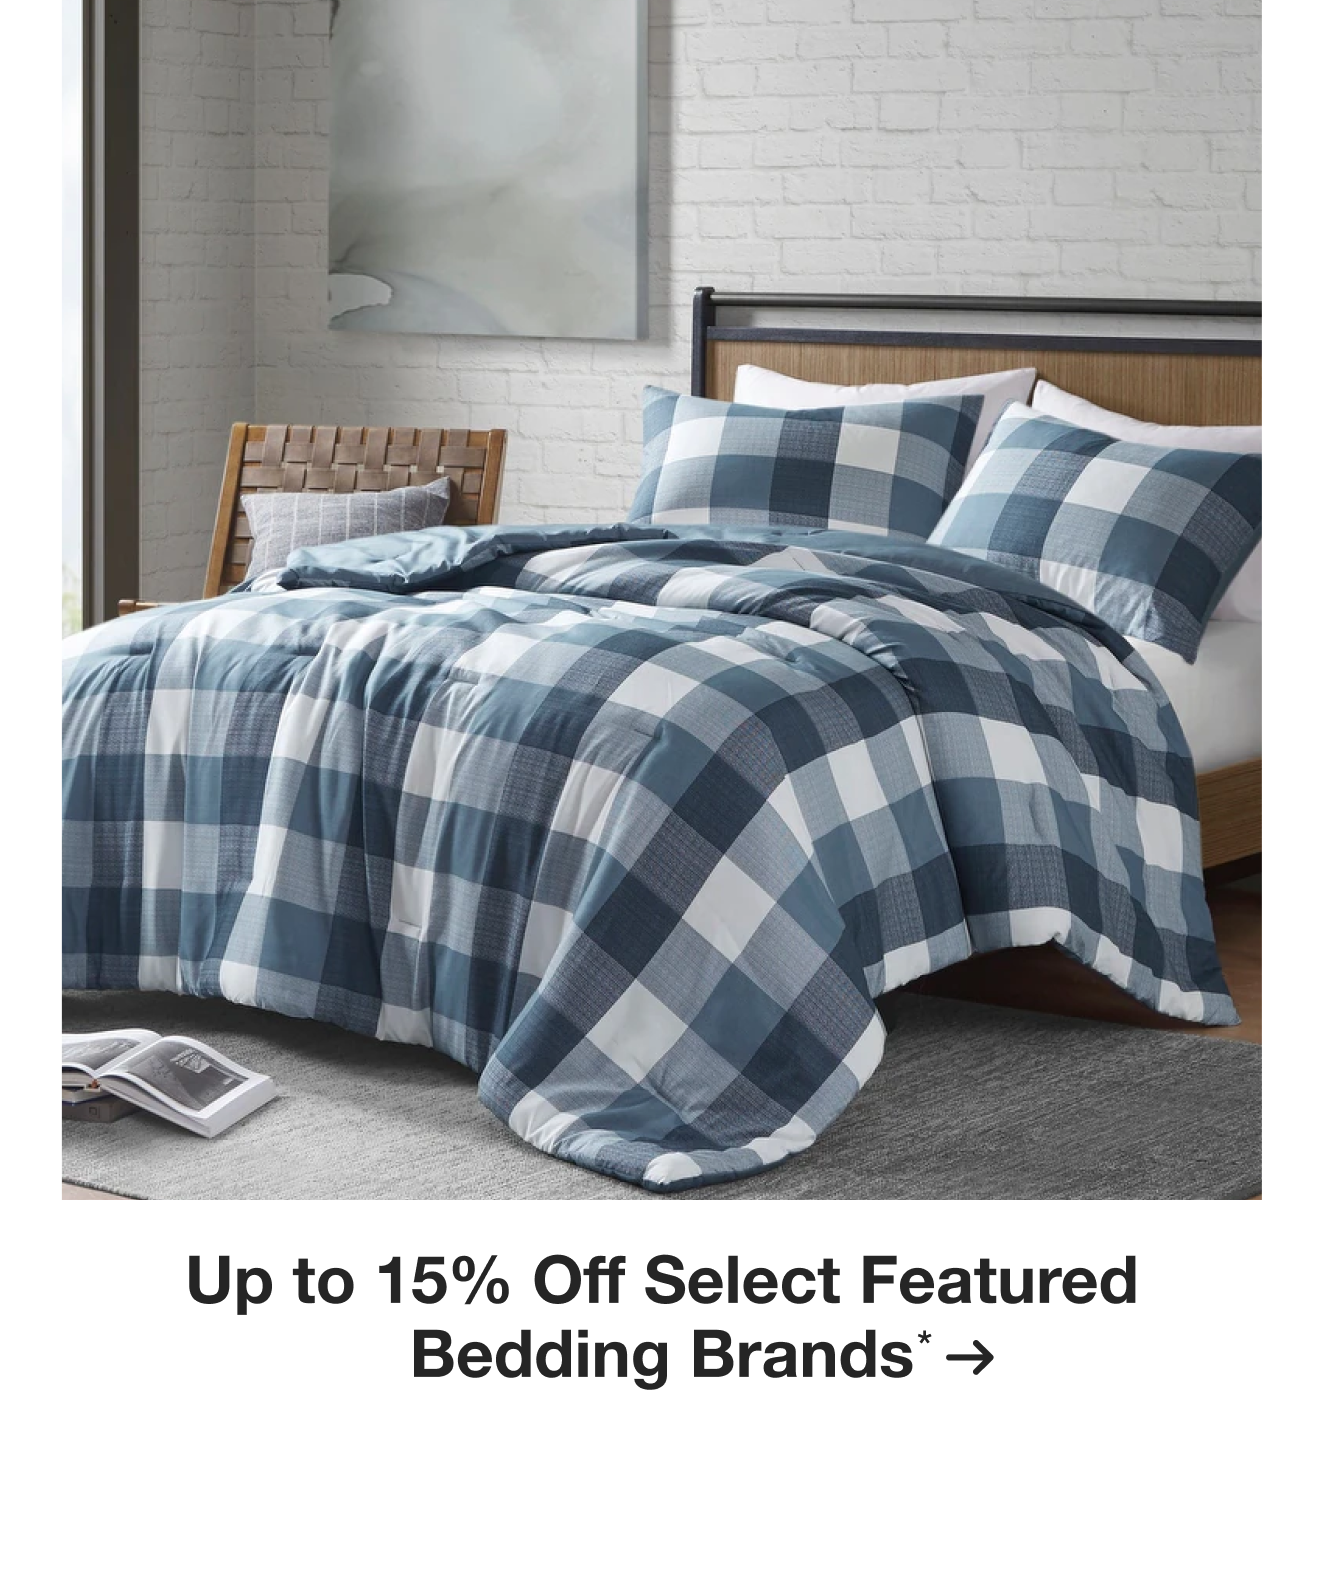 Up to 15% Off Select Featured Bedding Brands*